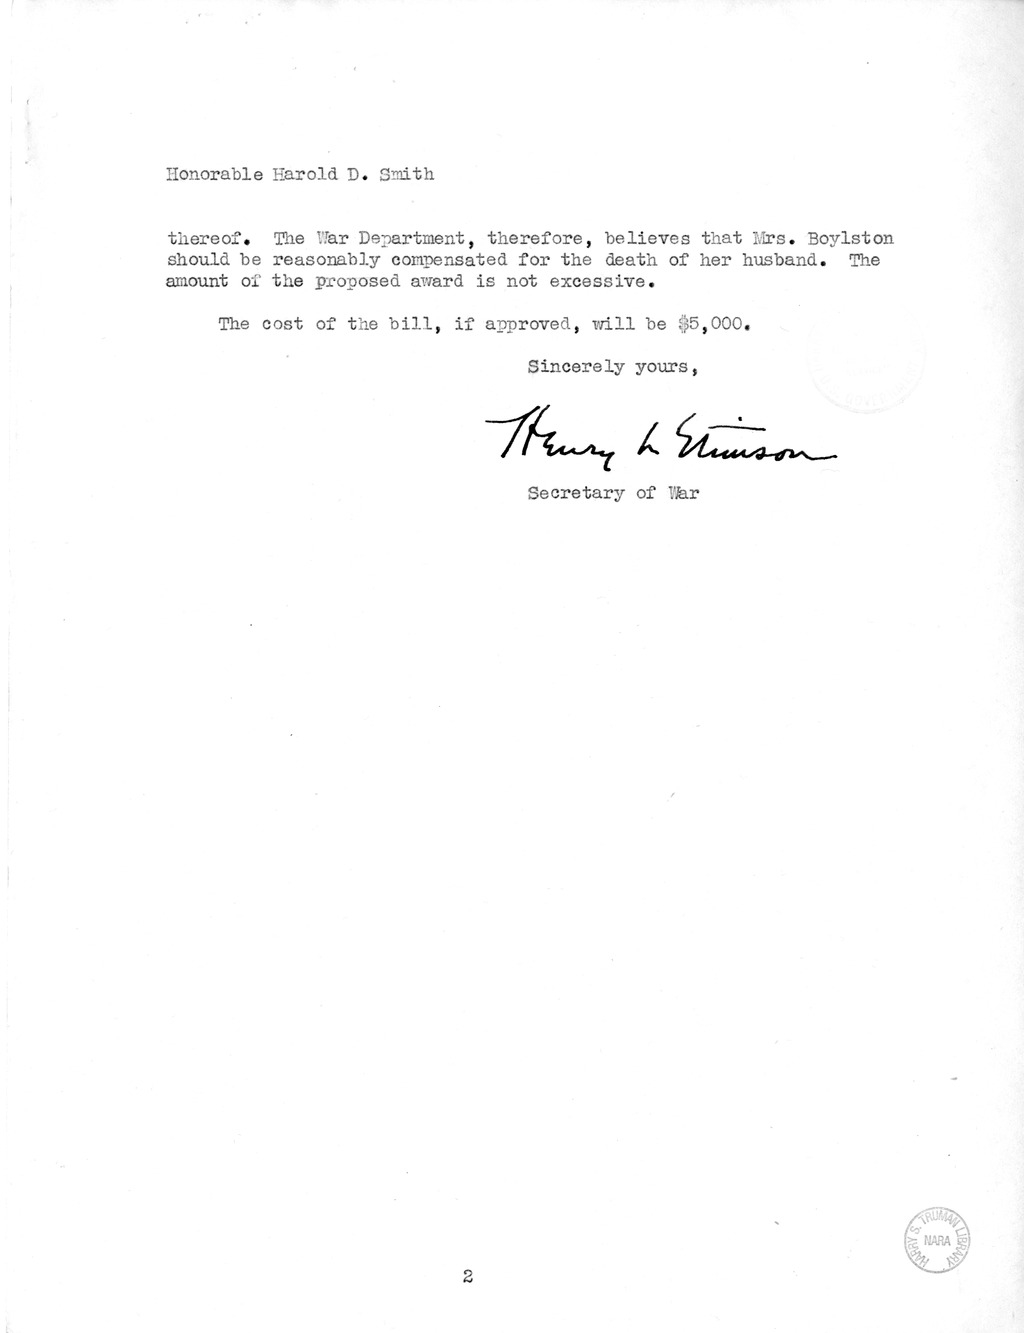 Memorandum from Frederick J. Bailey to M. C. Latta, S. 194, For the Relief of Mrs. Glenn T. Boylston, with Attachments